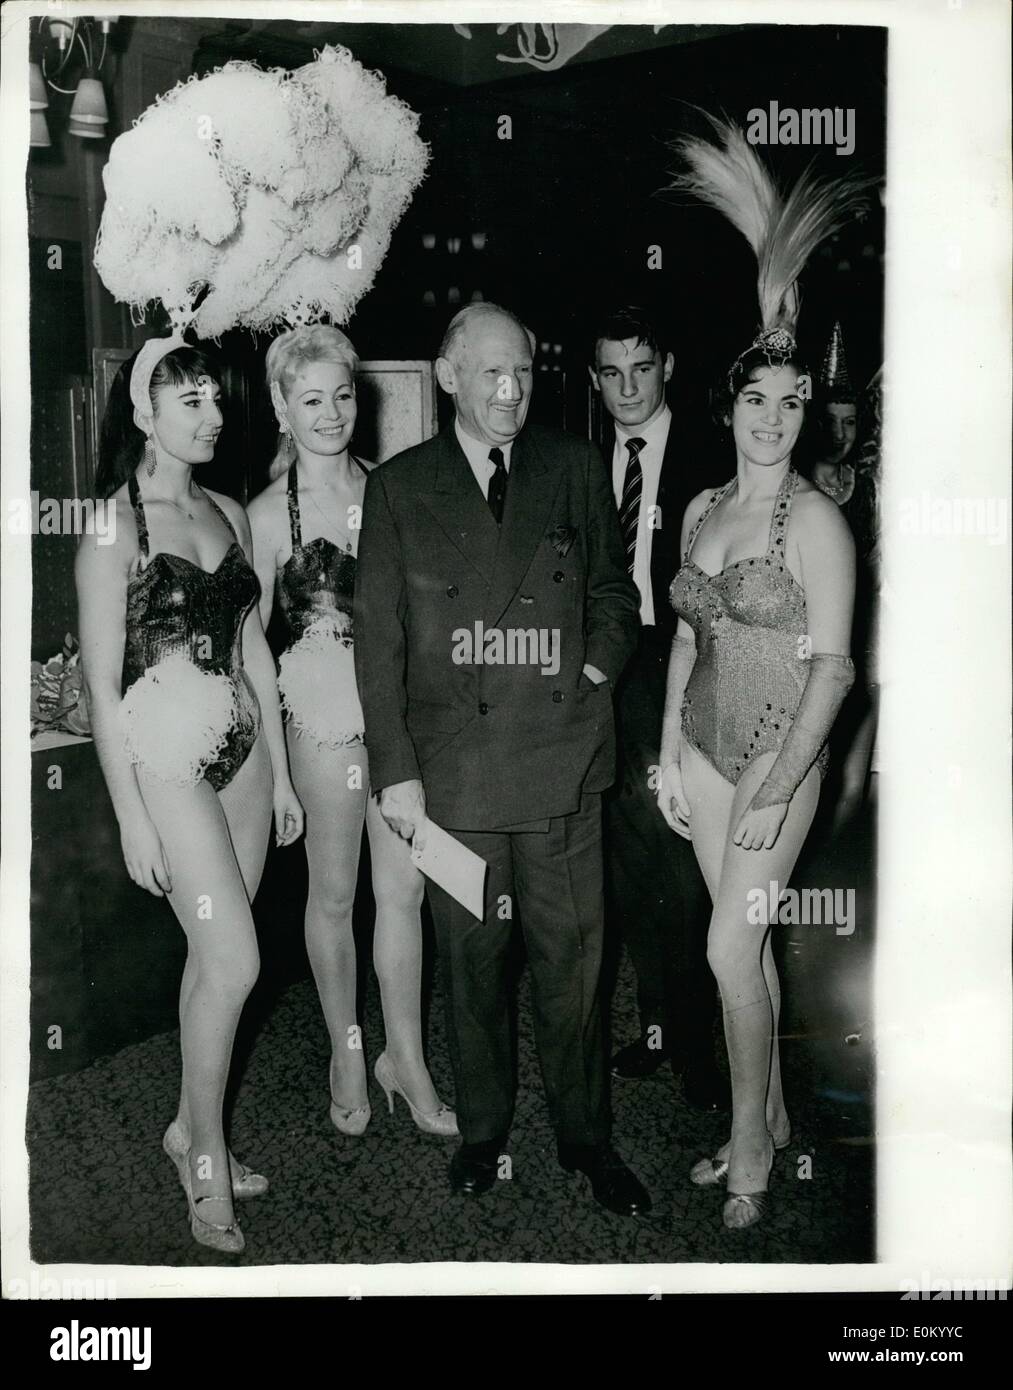 Dec. 12, 1952 - Monty goes to the circus: Big opening night of Bertram Mills. Field Marshal Lord Montgomery along with a number of other very well known personalities including the Lord Mayor of London Sir Ralph Perring went along last night to the opening performance of Britain's top Big Top Circus, Bertram Mills. Photo Shows: Monty amongst the girls at the circus yesterday. The girls all appearing in the show are from Hanover, Germany, they are left to right un the Morleys unicycle act Lotte and Renata Morles and Susan Saren, A trapeze artist. THM/Keystone Stock Photo